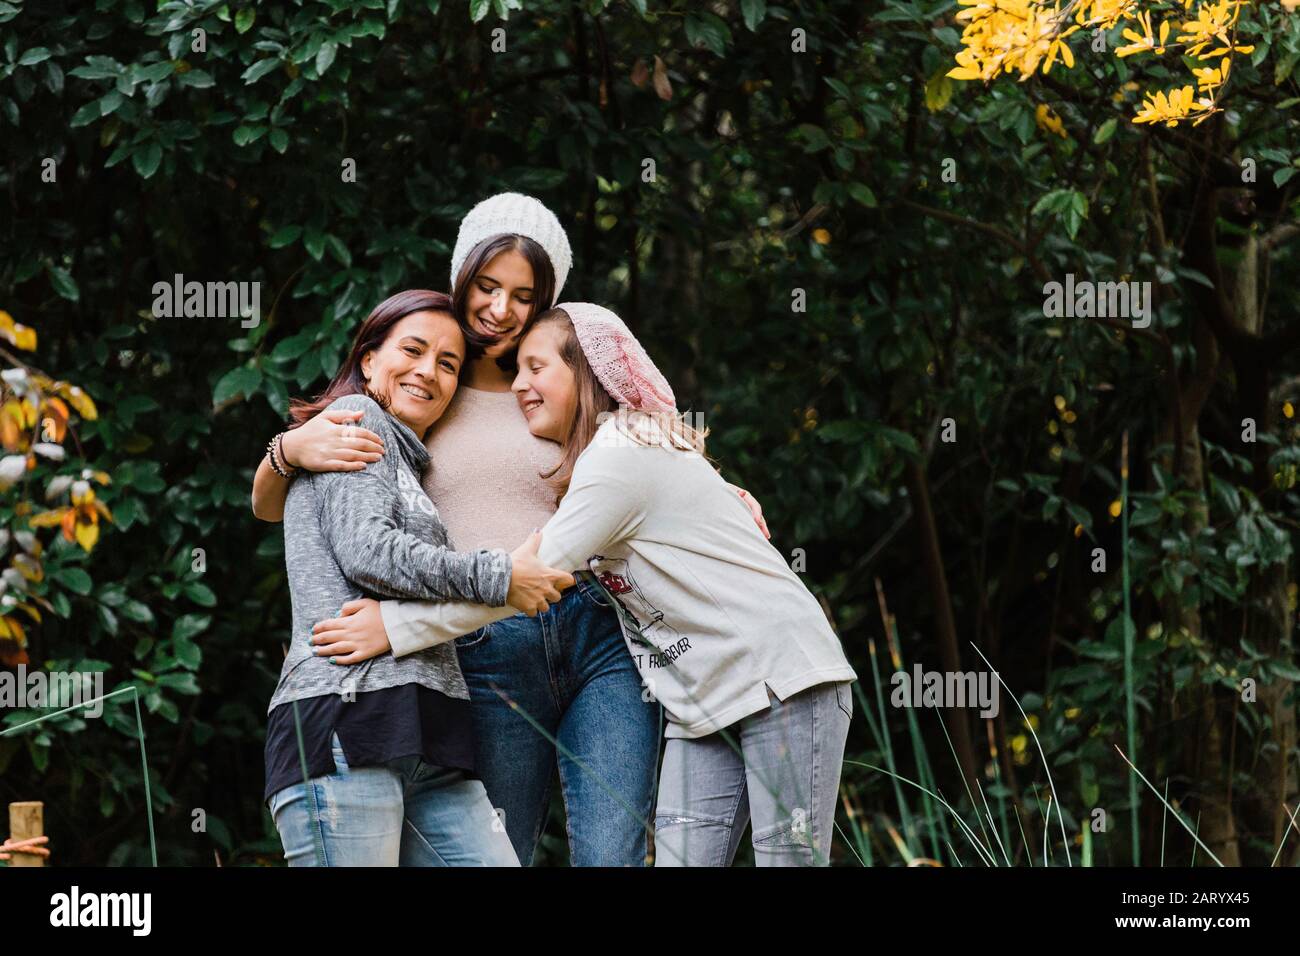 Mother and daughters embracing by trees Stock Photo